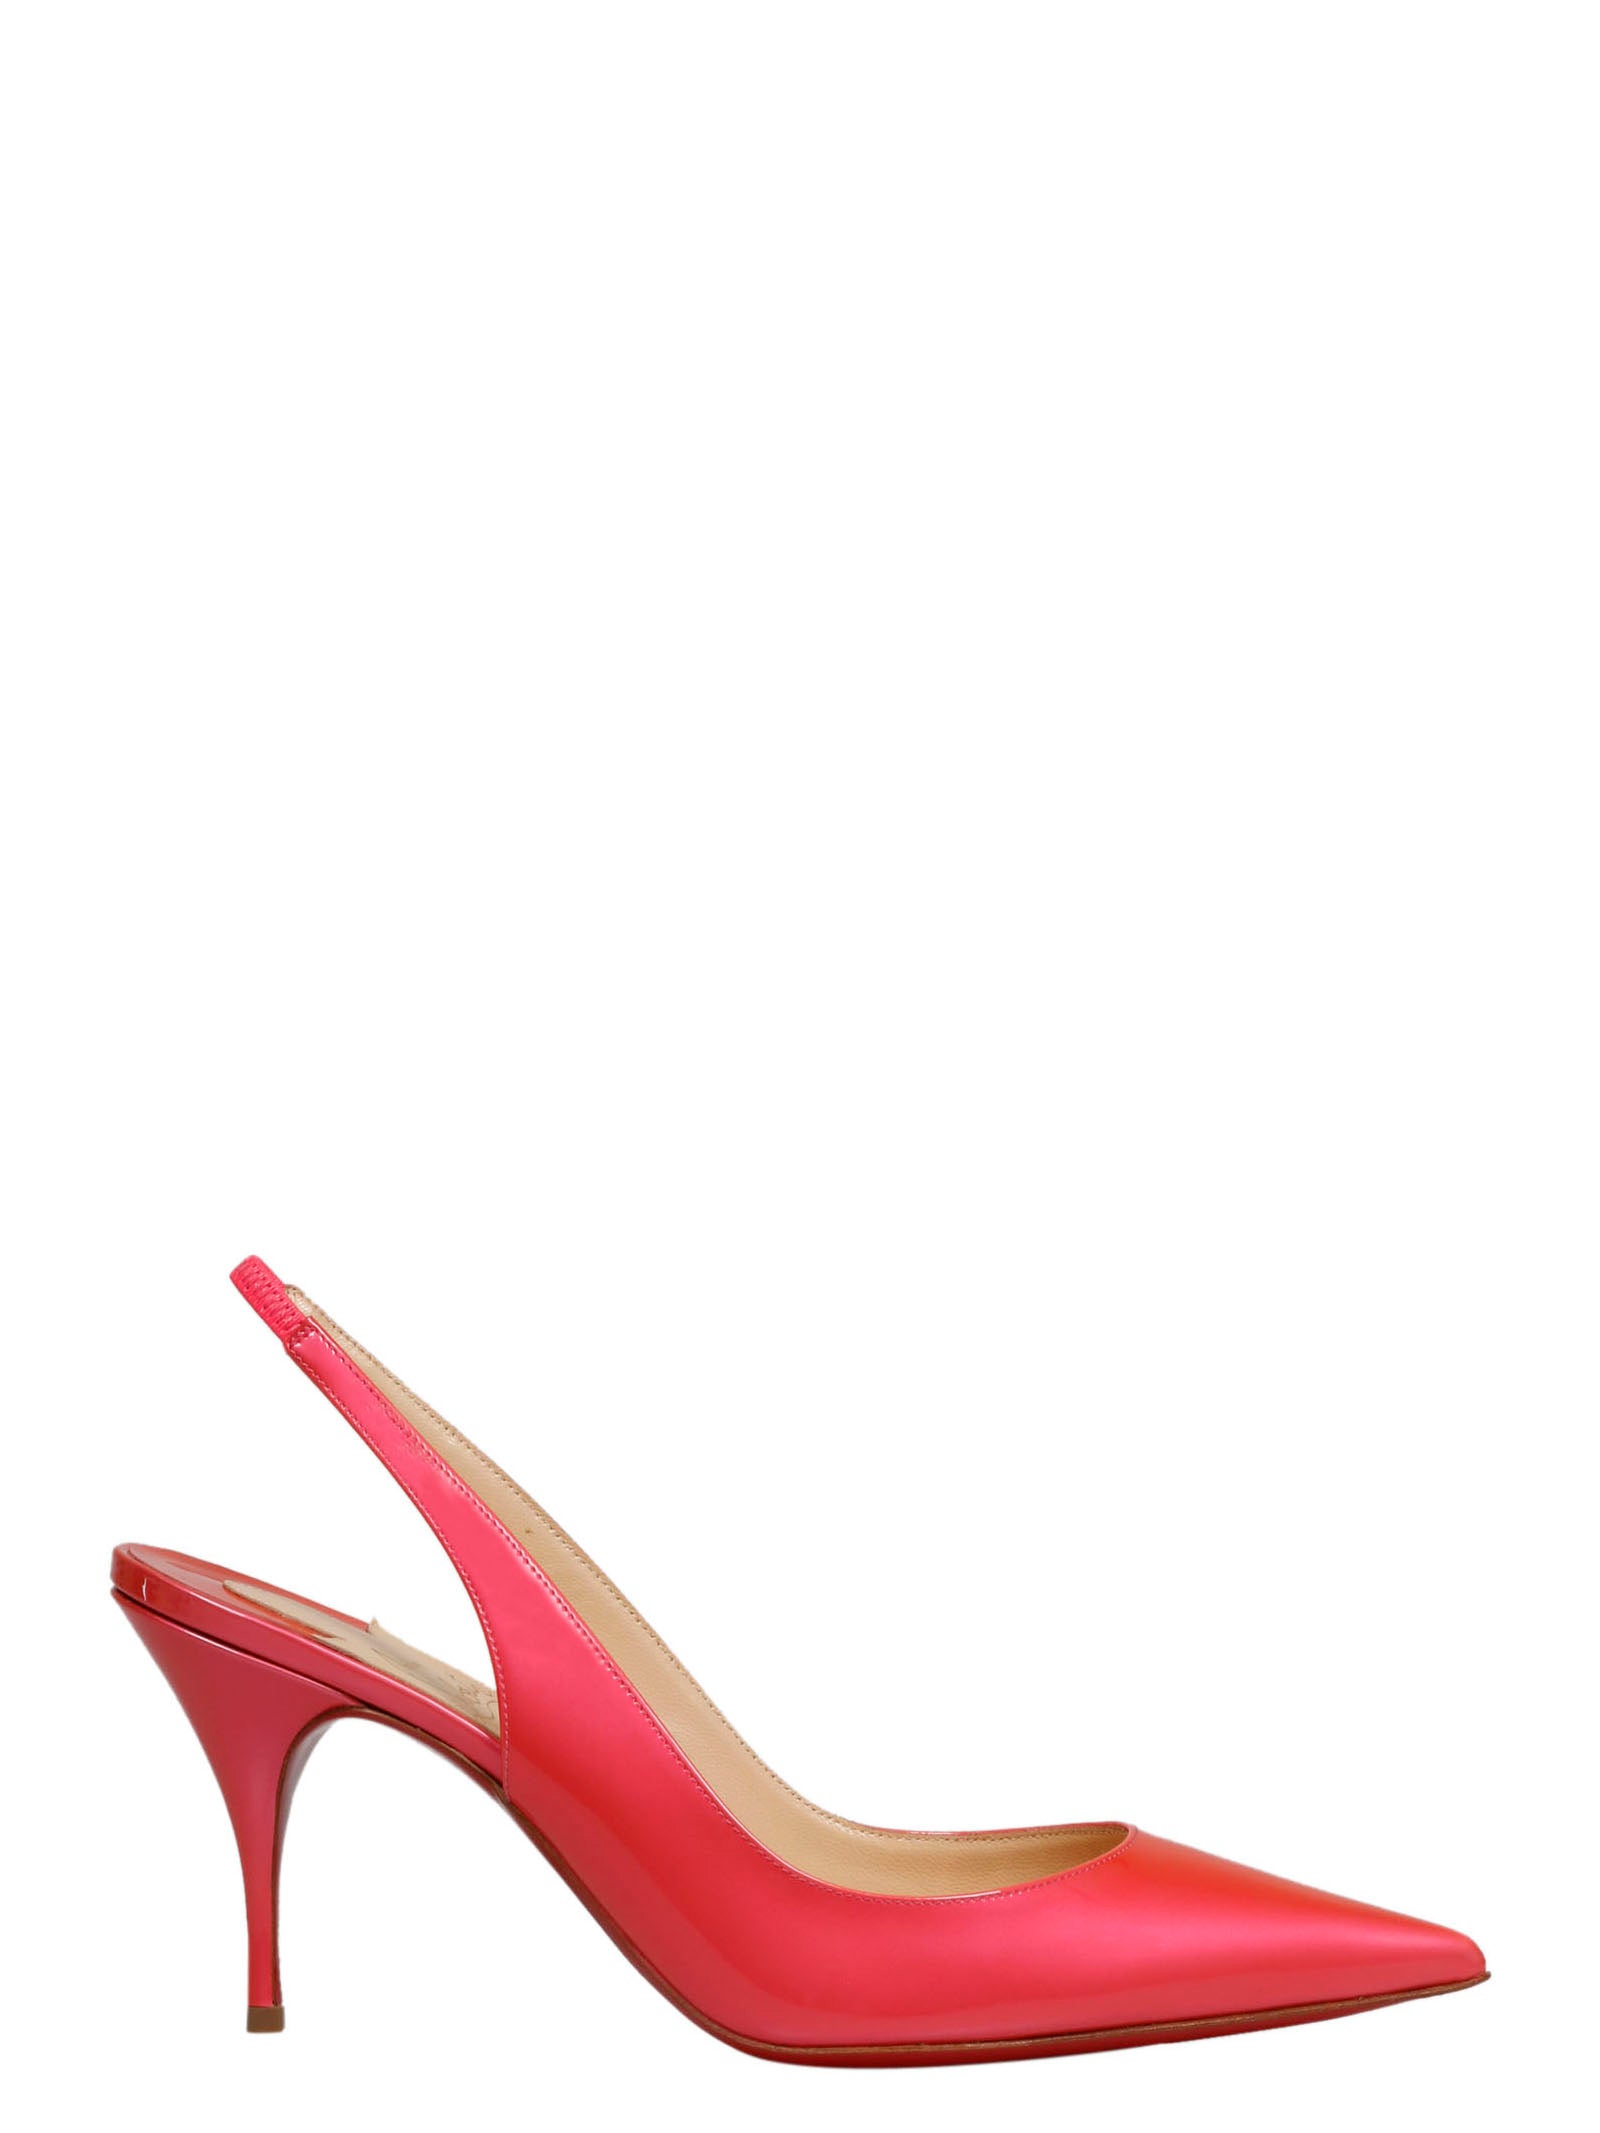 Christian Louboutin Clare Slingback 80 Pumps In Red